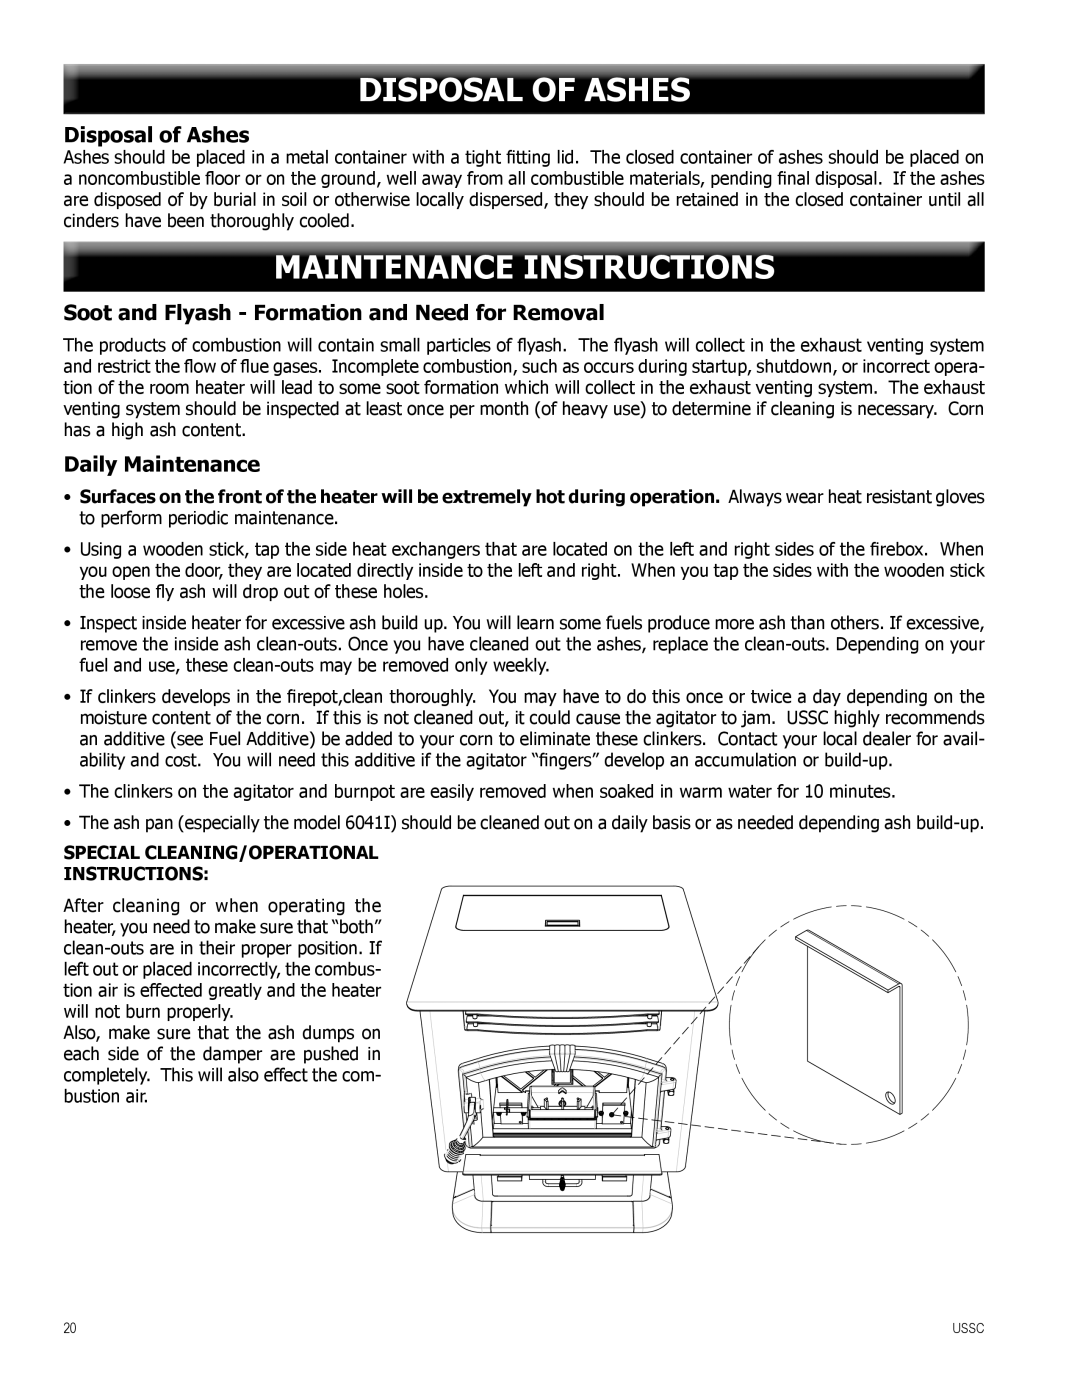 United States Stove 6041TP, 6041I, 6041HF Disposal Of Ashes, Maintenance Instructions, Disposal of Ashes, Daily Maintenance 